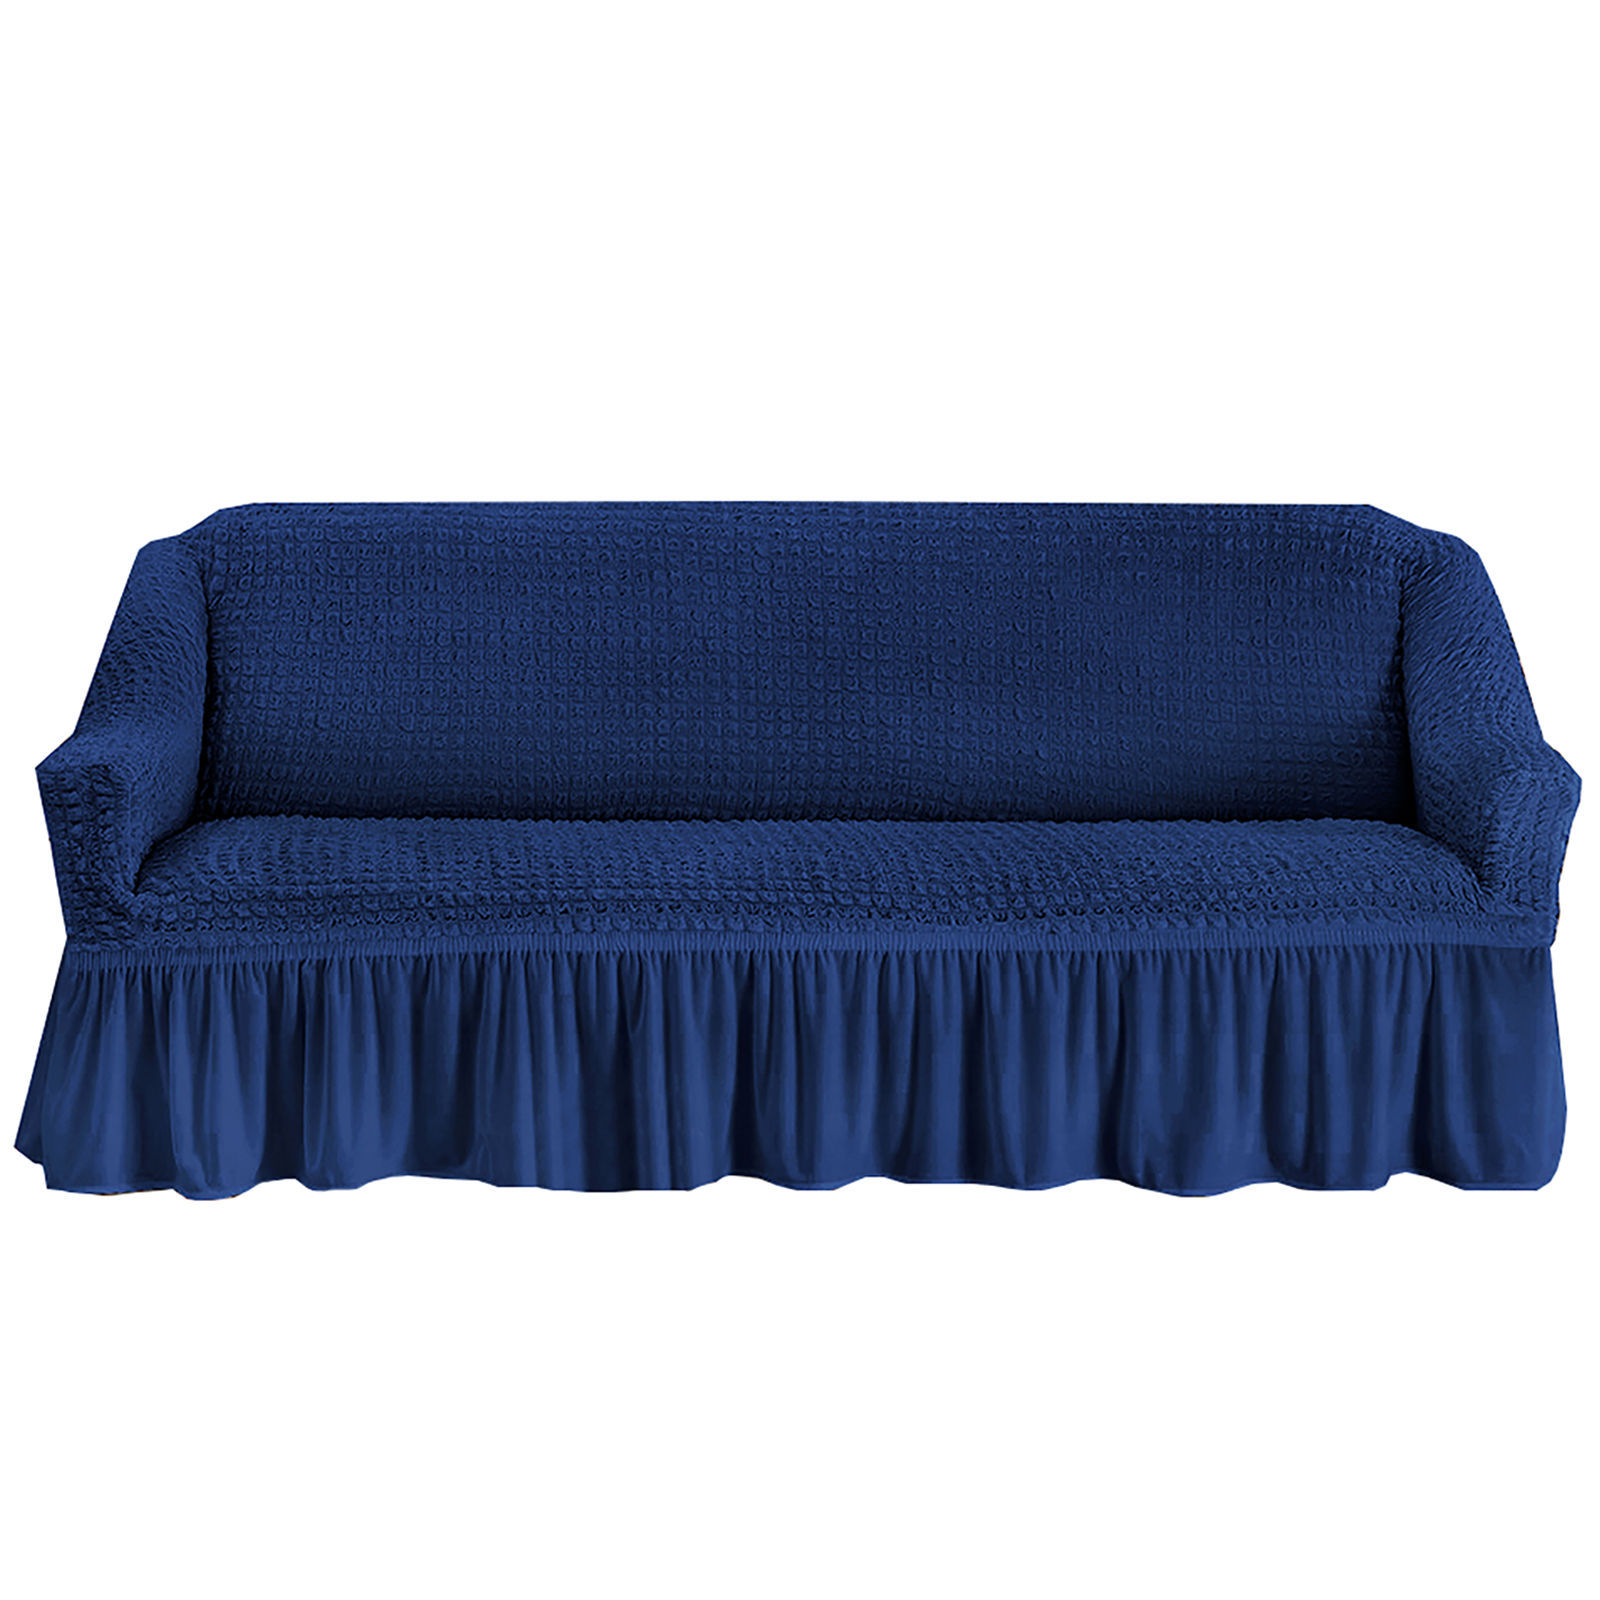 Stretch Sofa Slipcover, 3 Seater Sofa Slipcovers With Skirt With Armless Soft Sofa Cover Elastic Straps Sofa Slipcover For Living Room Kids Pets-blue-X-Large